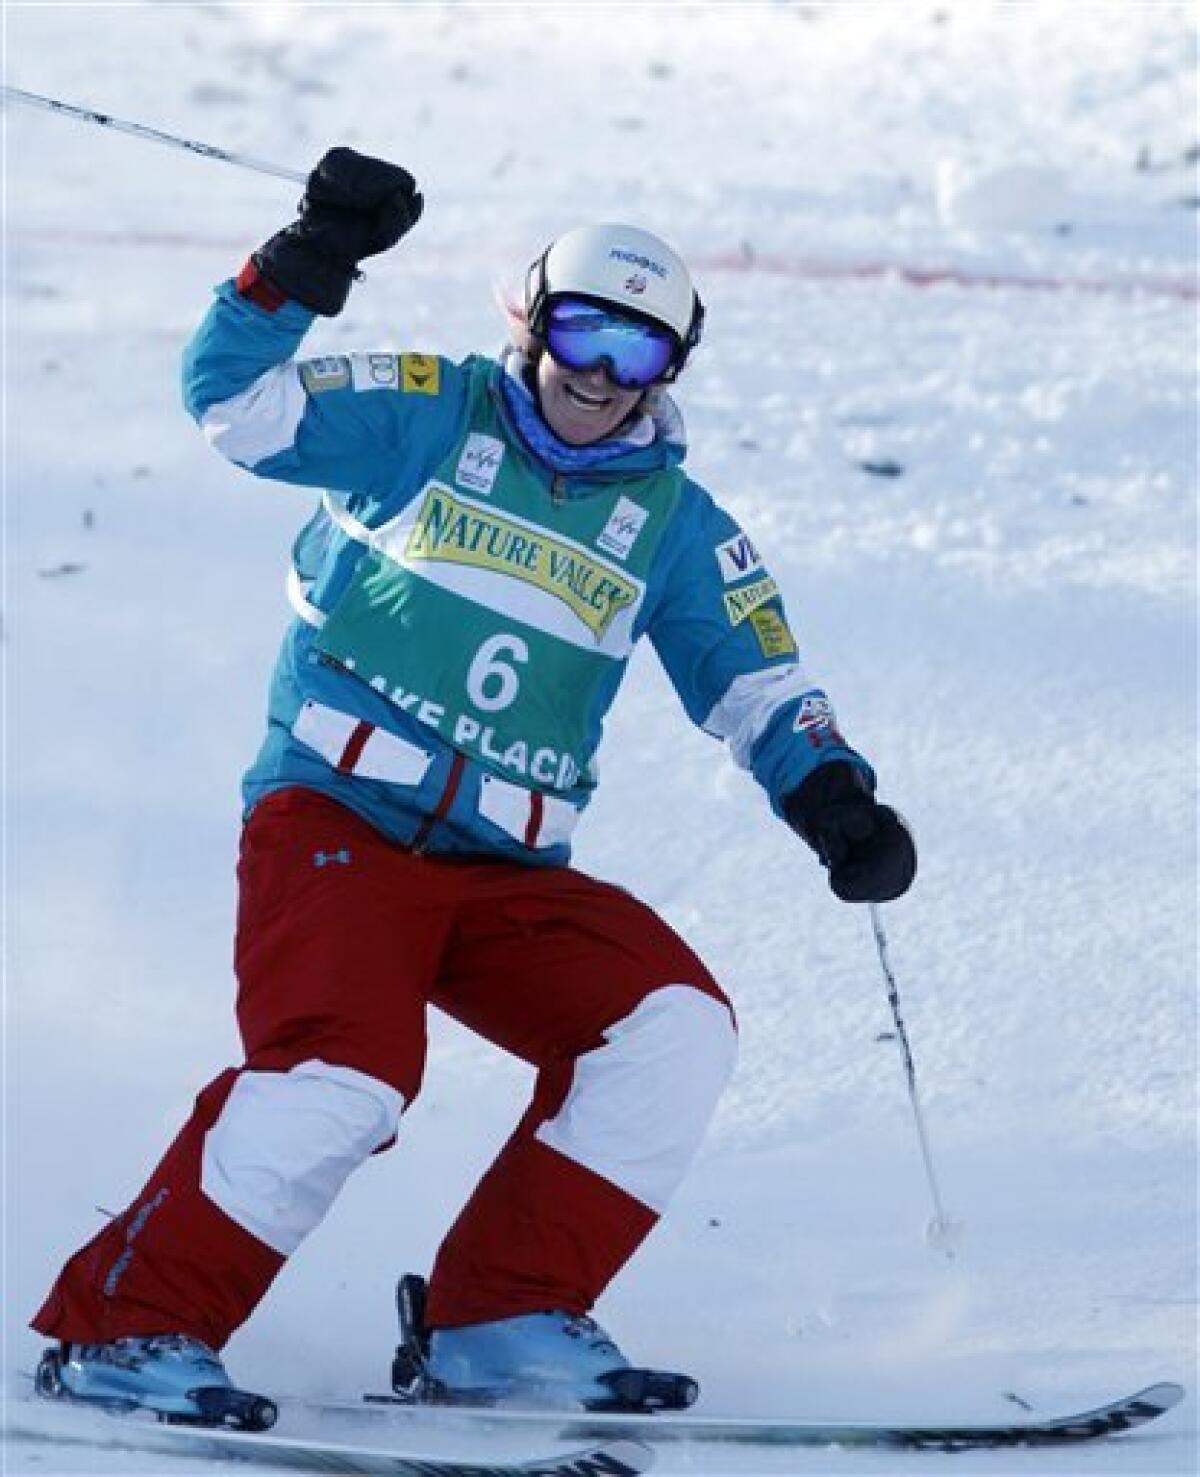 Shannon Bahrke,of the United States, reacts to her second-place finish in the ladies' moguls freestyle World Cup skiing event in Wilmington, N.Y., on Thursday, Jan. 21, 2010. (AP Photo/Mike Groll)